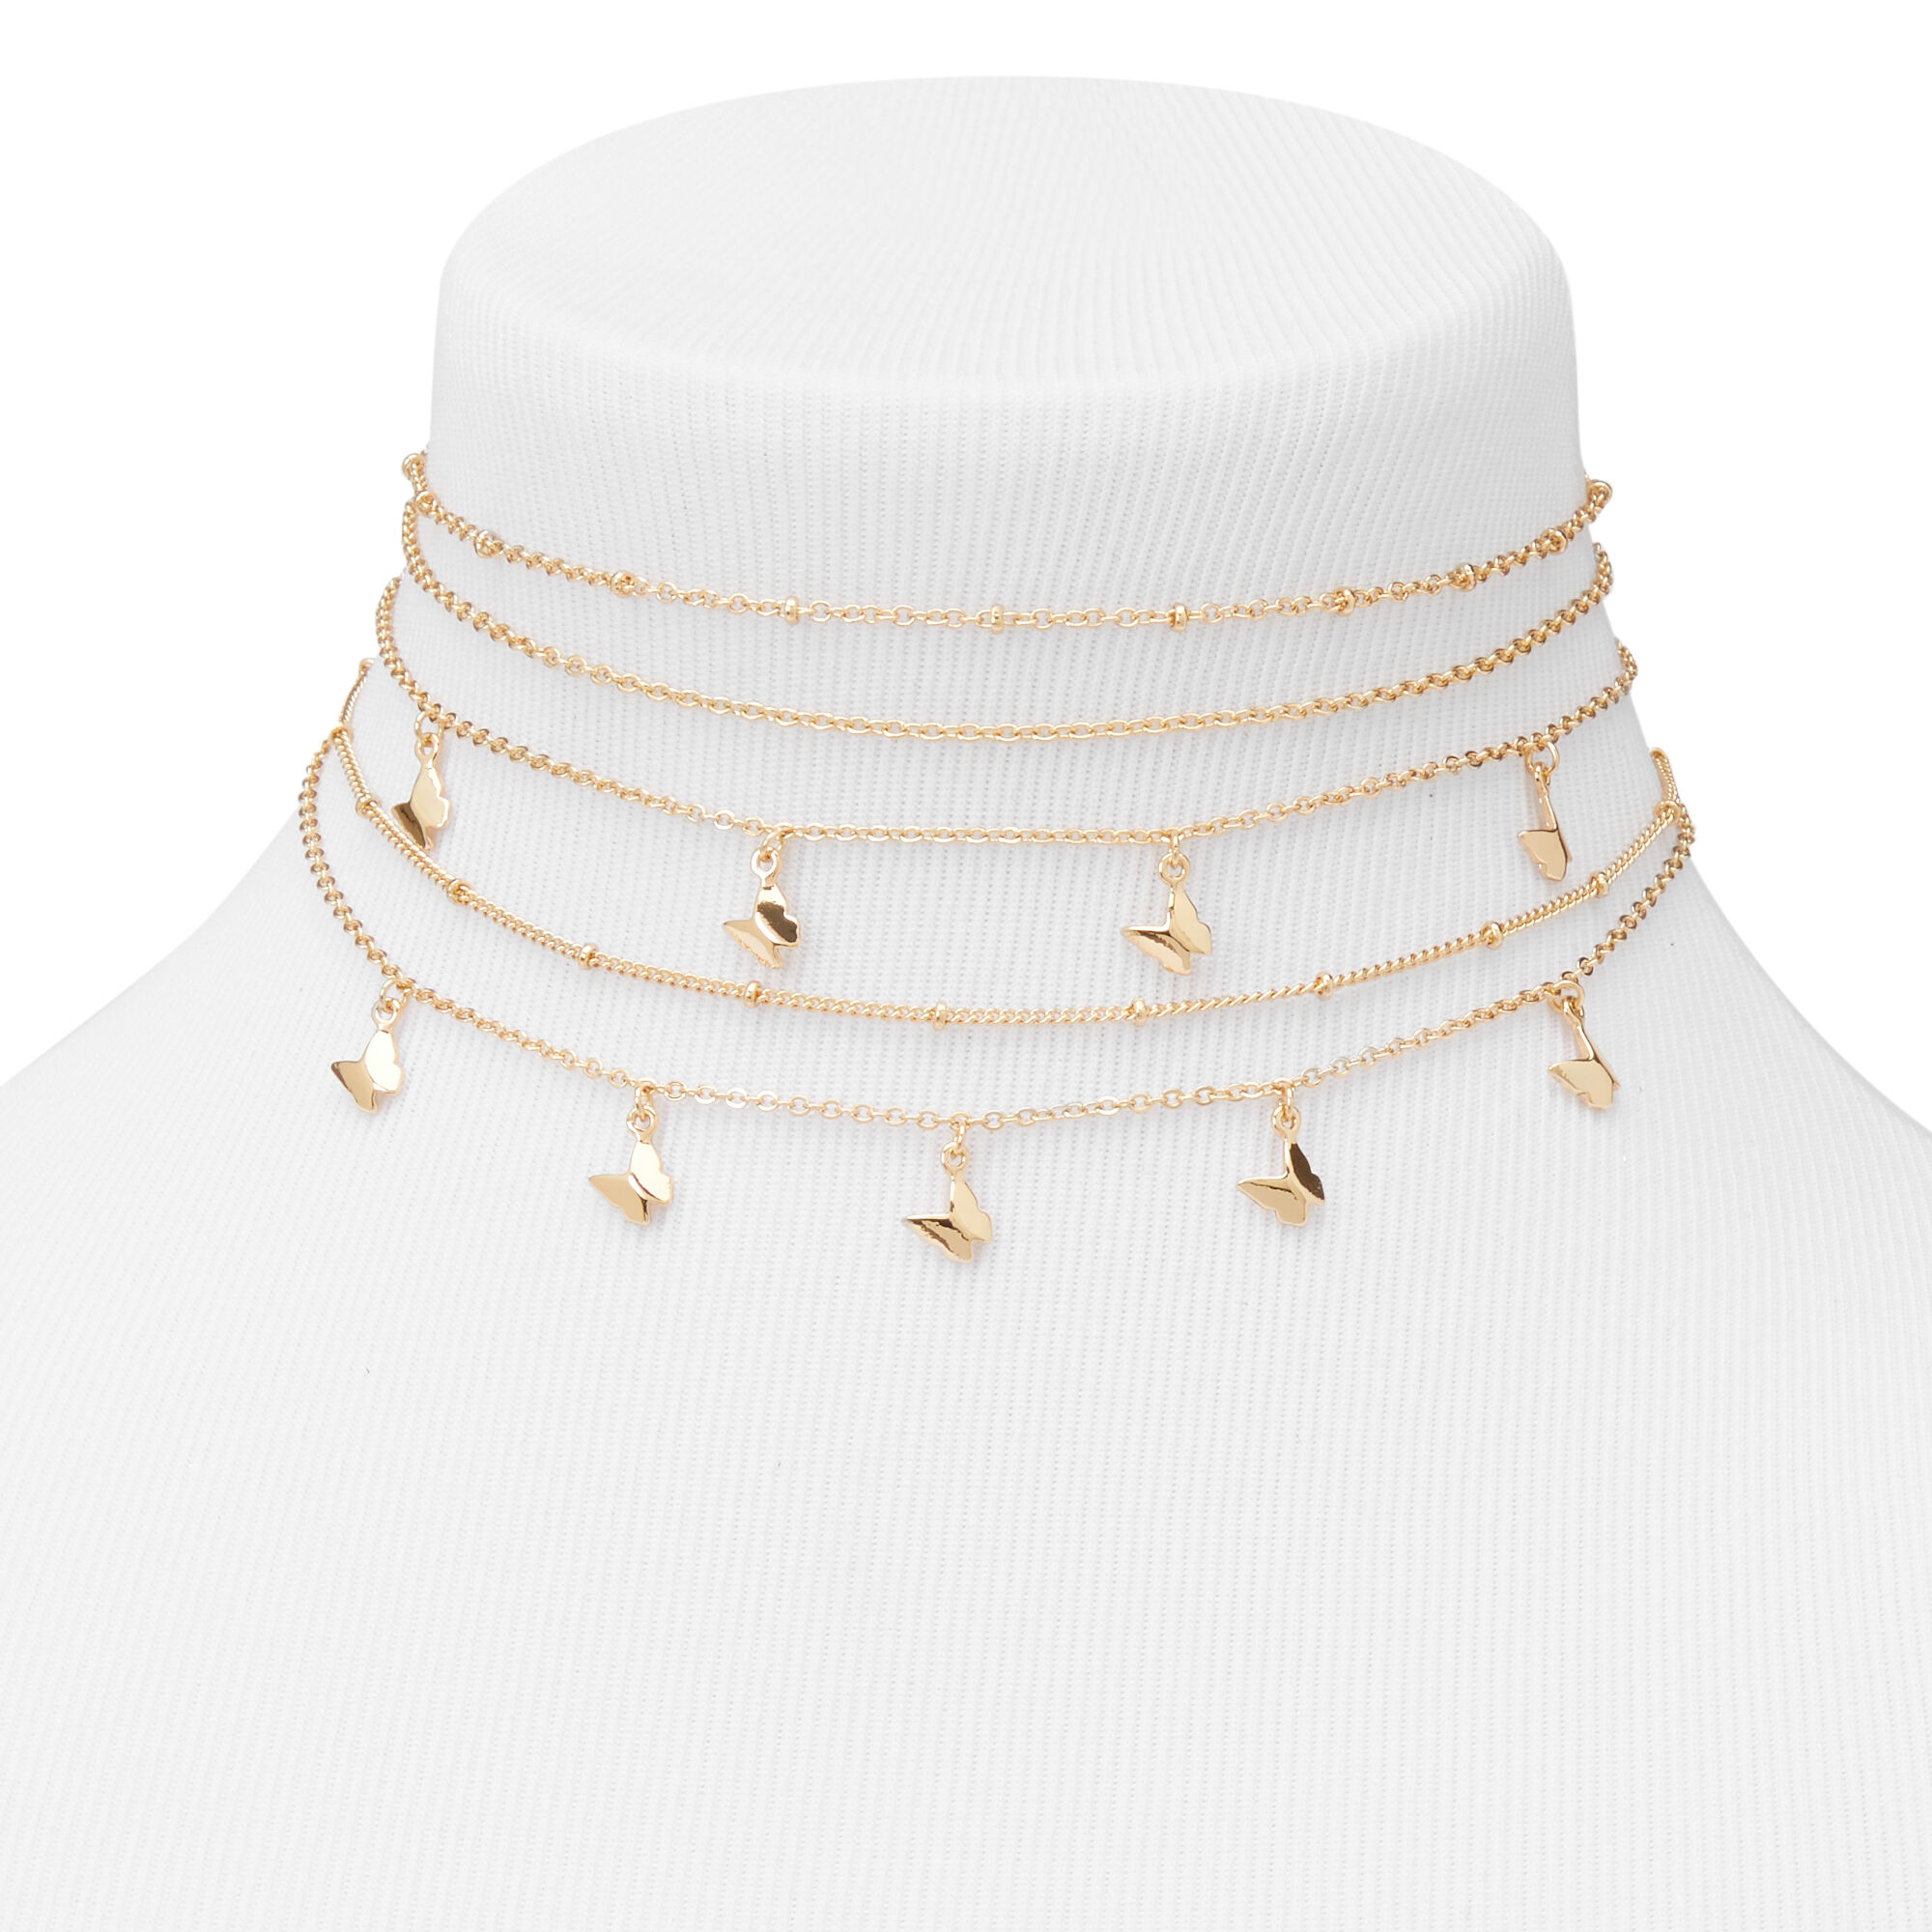 Butterfly Choker Necklaces - Pack | Icing US